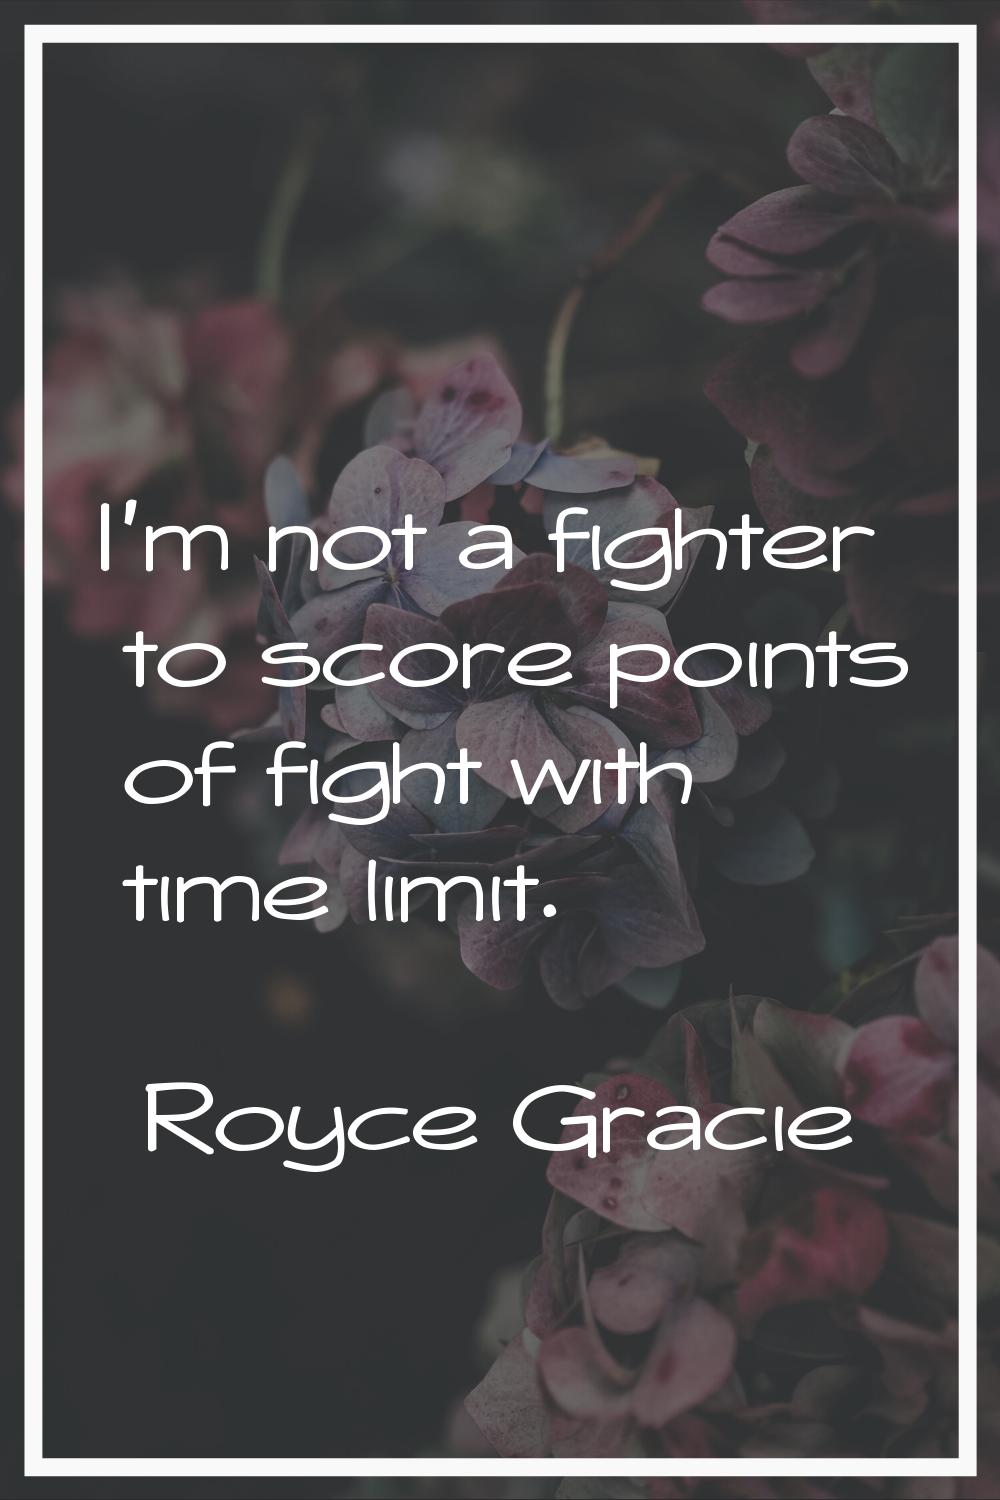 I'm not a fighter to score points of fight with time limit.